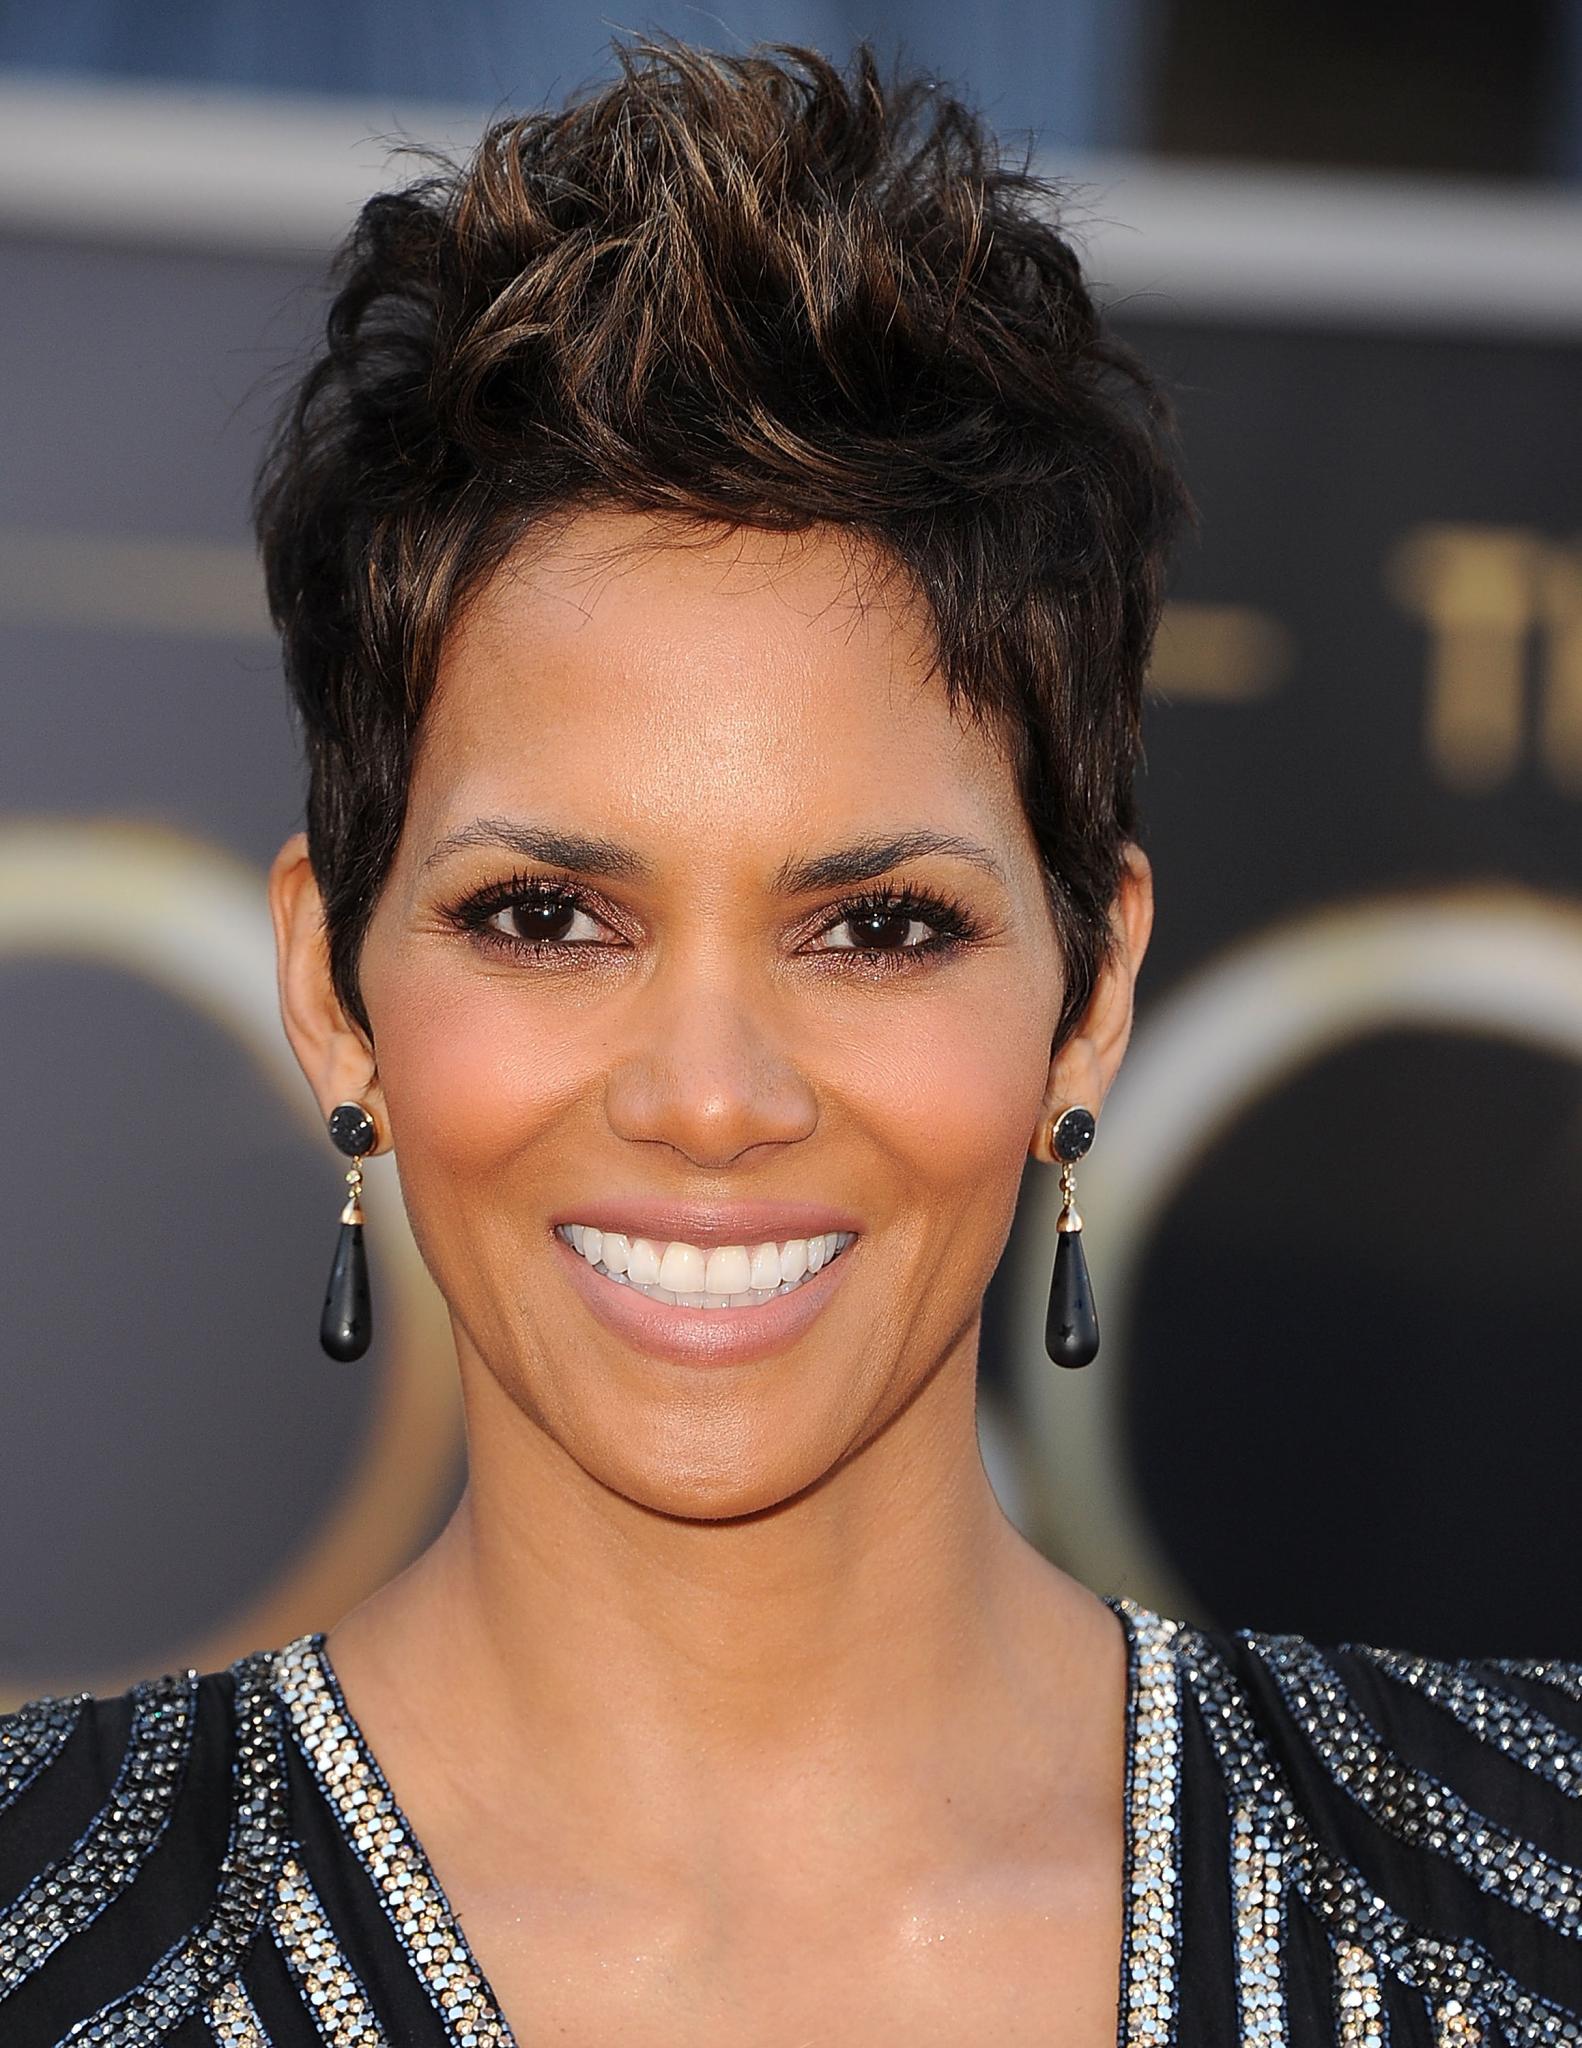 EXCLUSIVE: Halle Berry Talks ‘Frankie & Alice’, Producing in Hollywood